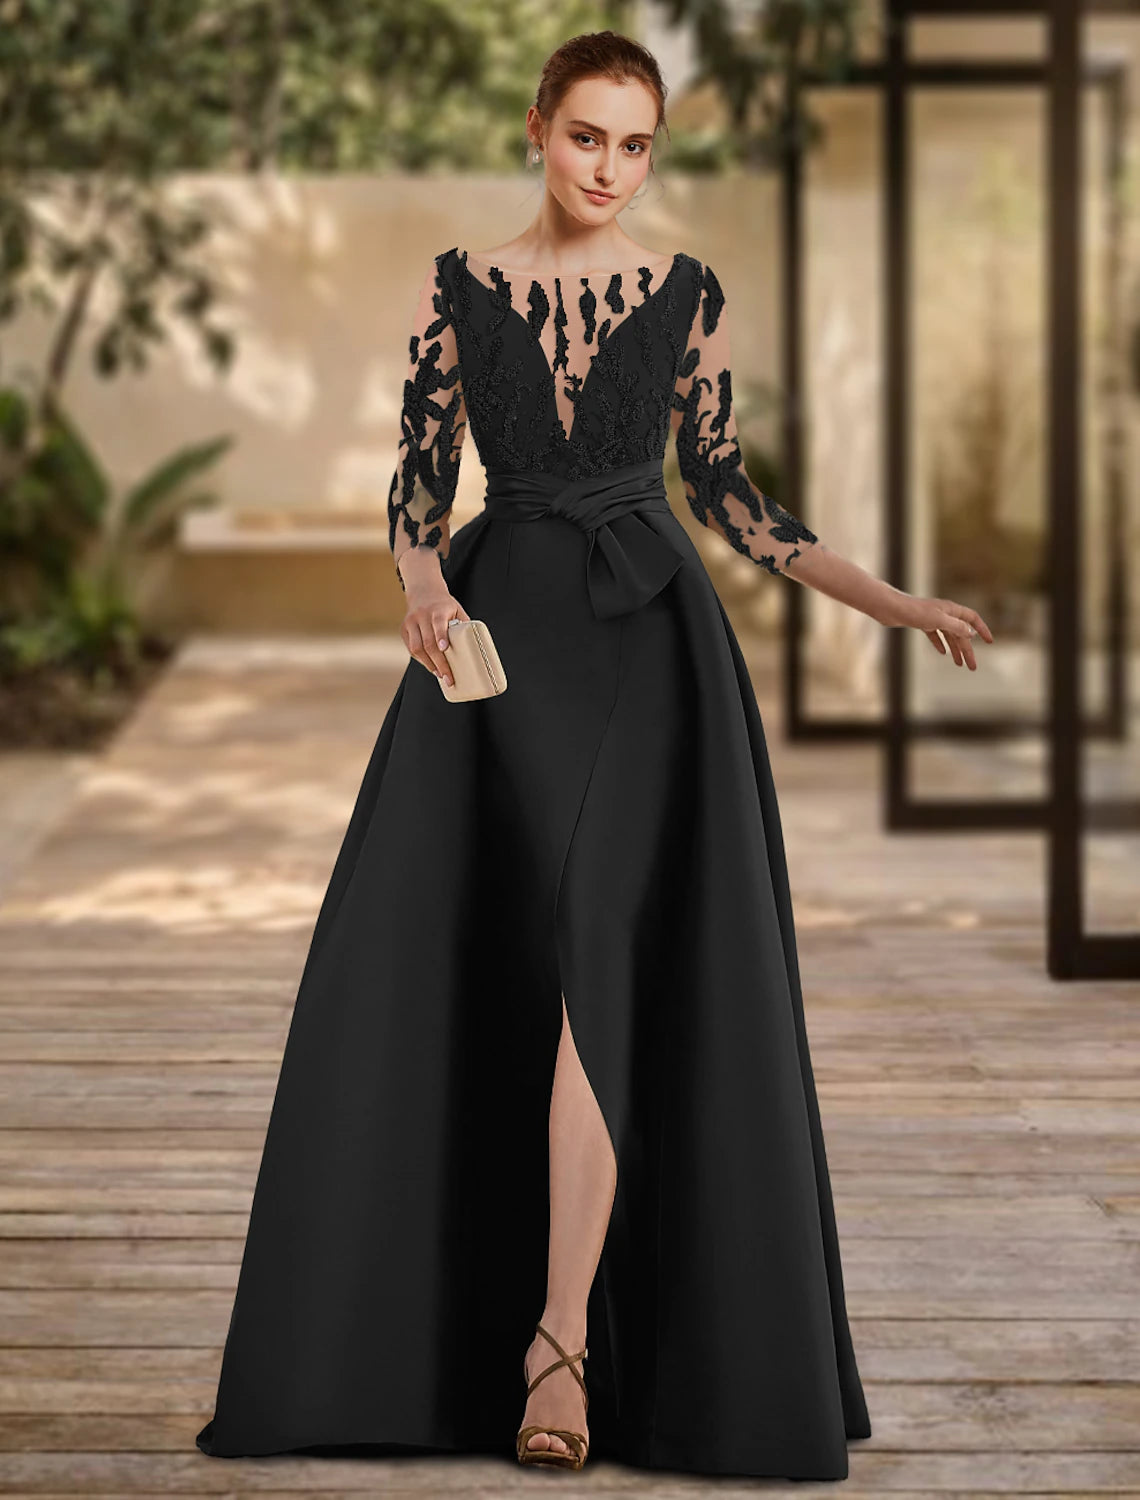 A-Line Evening Gown Open Back Dress Formal Wedding Guest Floor Length 3/4 Length Sleeve Scoop Neck Lace with Slit Strappy